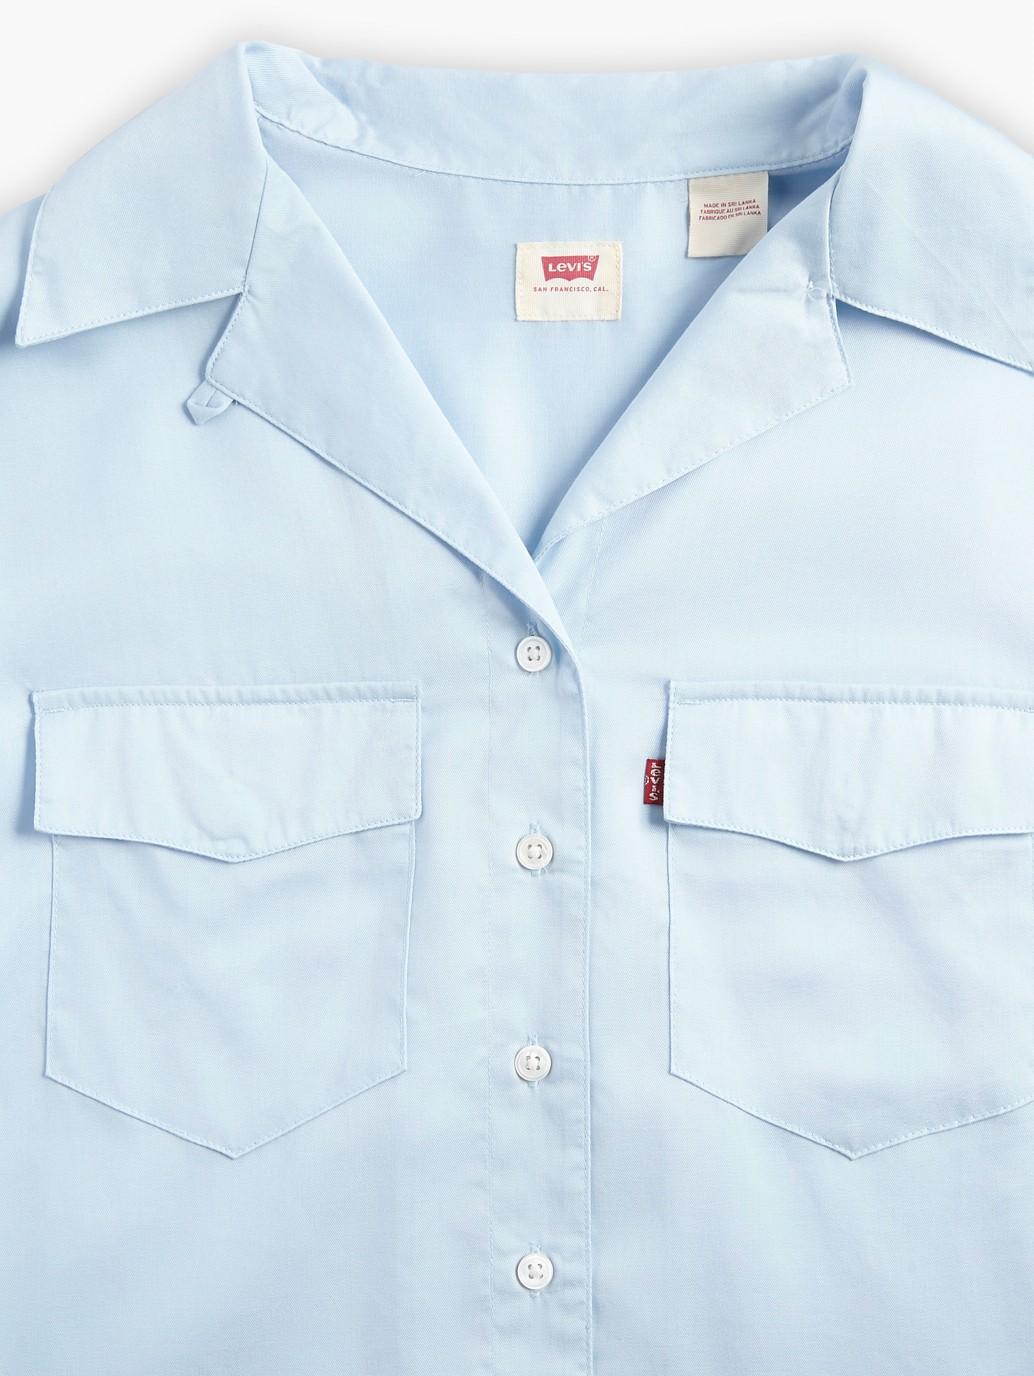 Buy Levi's® Women's Ember Bowling Shirt| Levi’s® Official Online Store PH